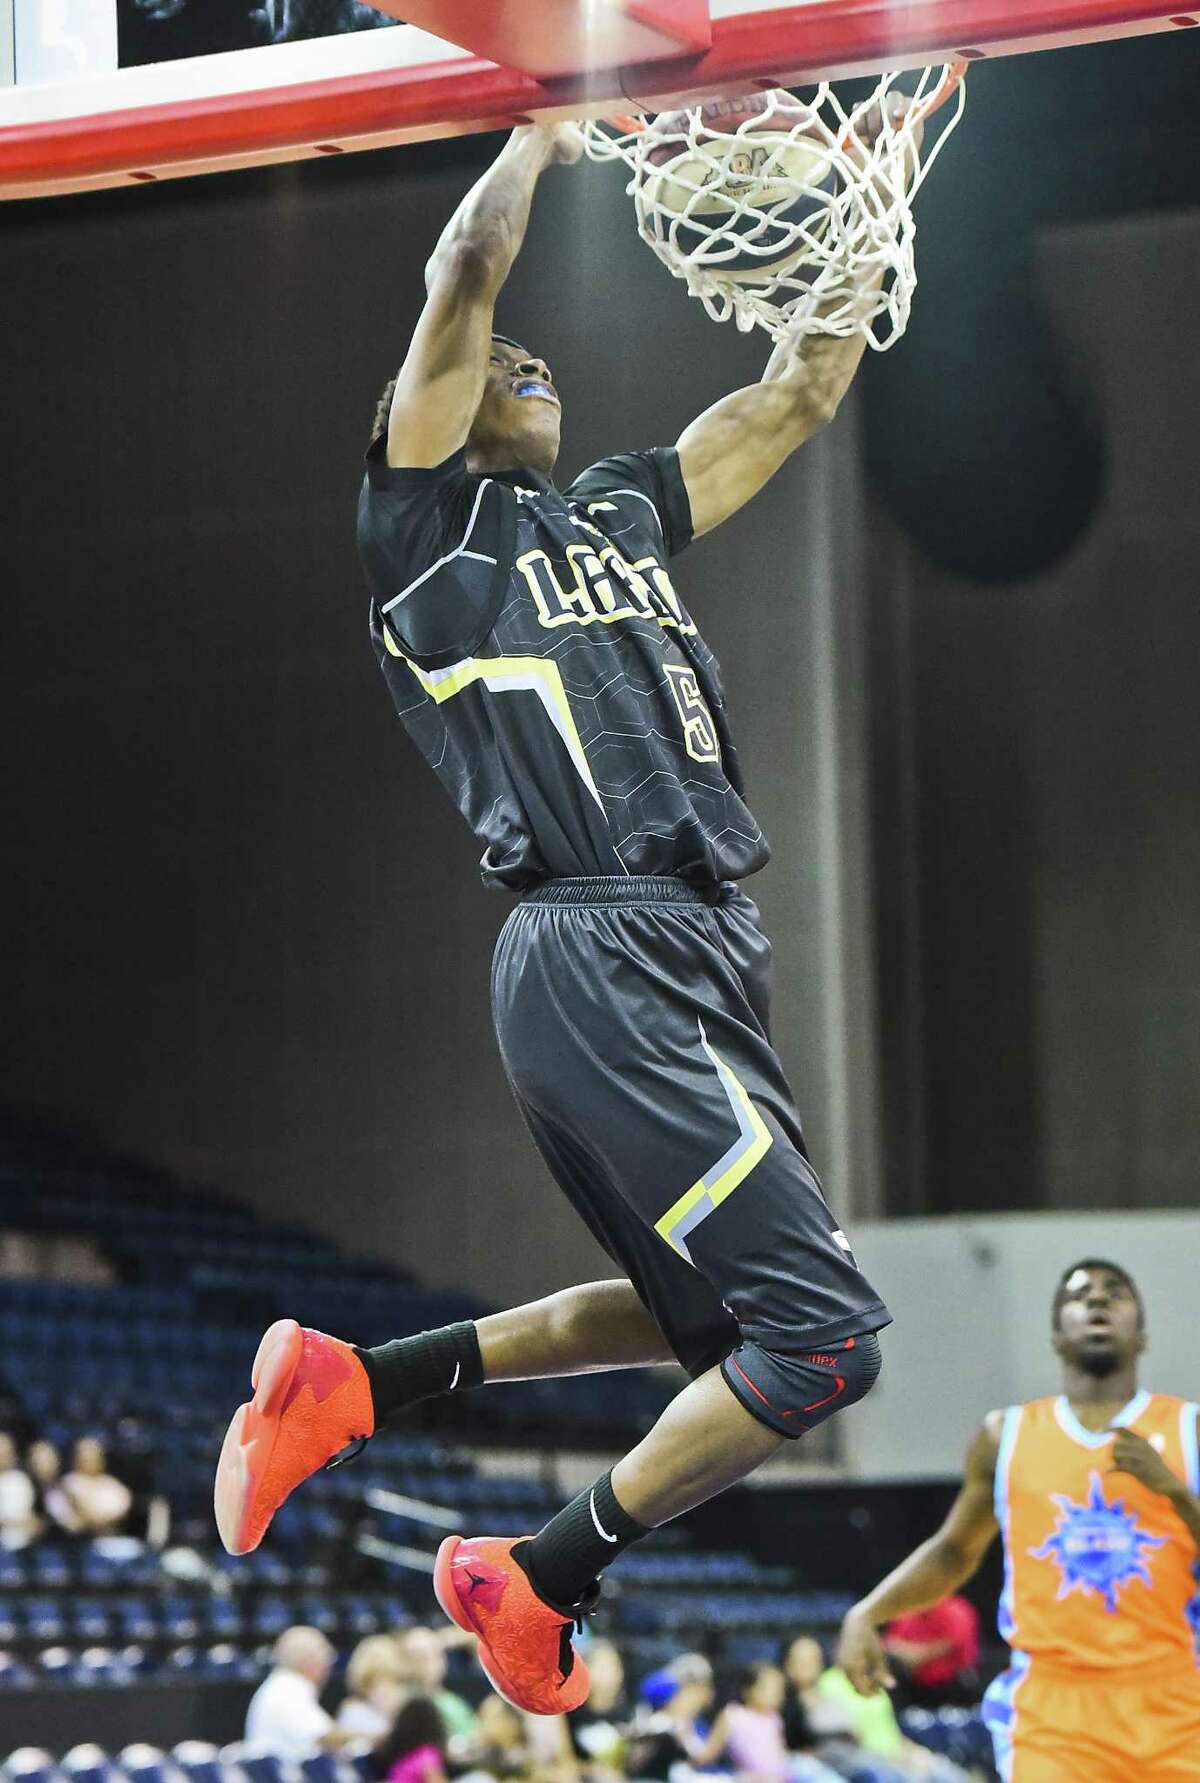 Swarm forward Steven Harris dunks in a game last year. Laredo’s return for a third full regular season is still uncertain, but ABA chairman/co-founder Joe Newman said he expects the team will be back next year.